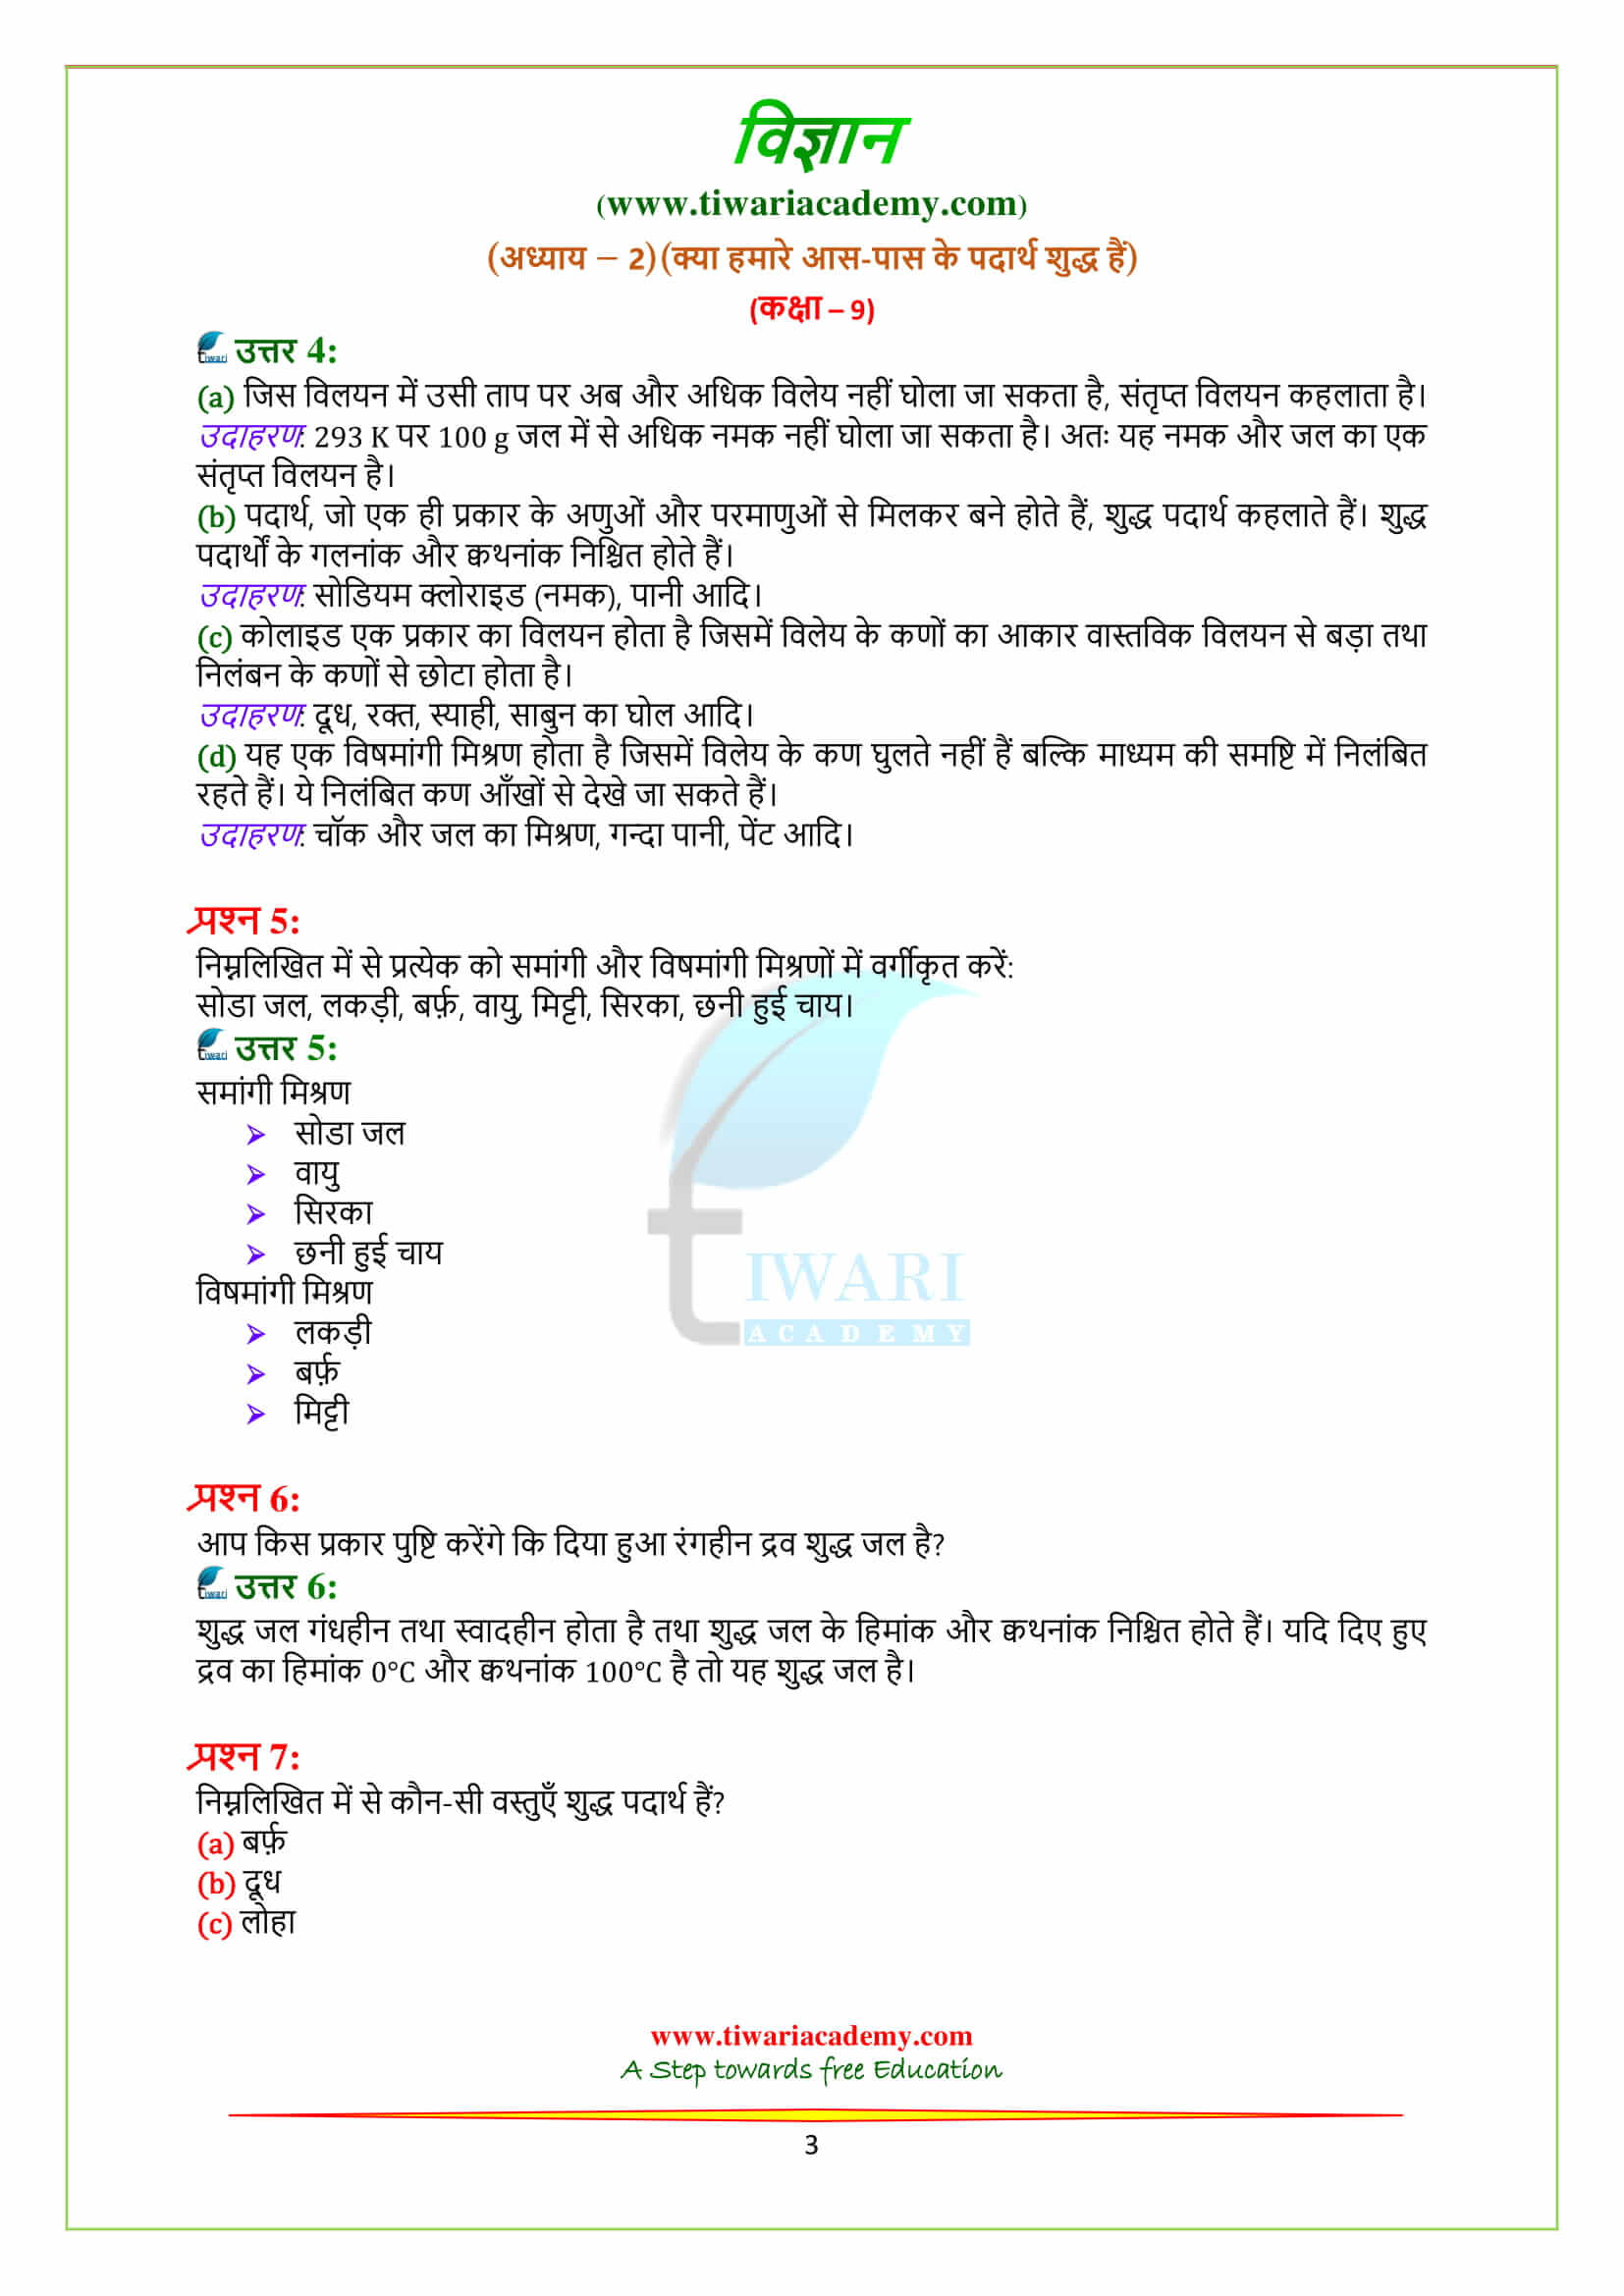 NCERT Solutions for Class 9 Science Chapter 2 in hindi pdf